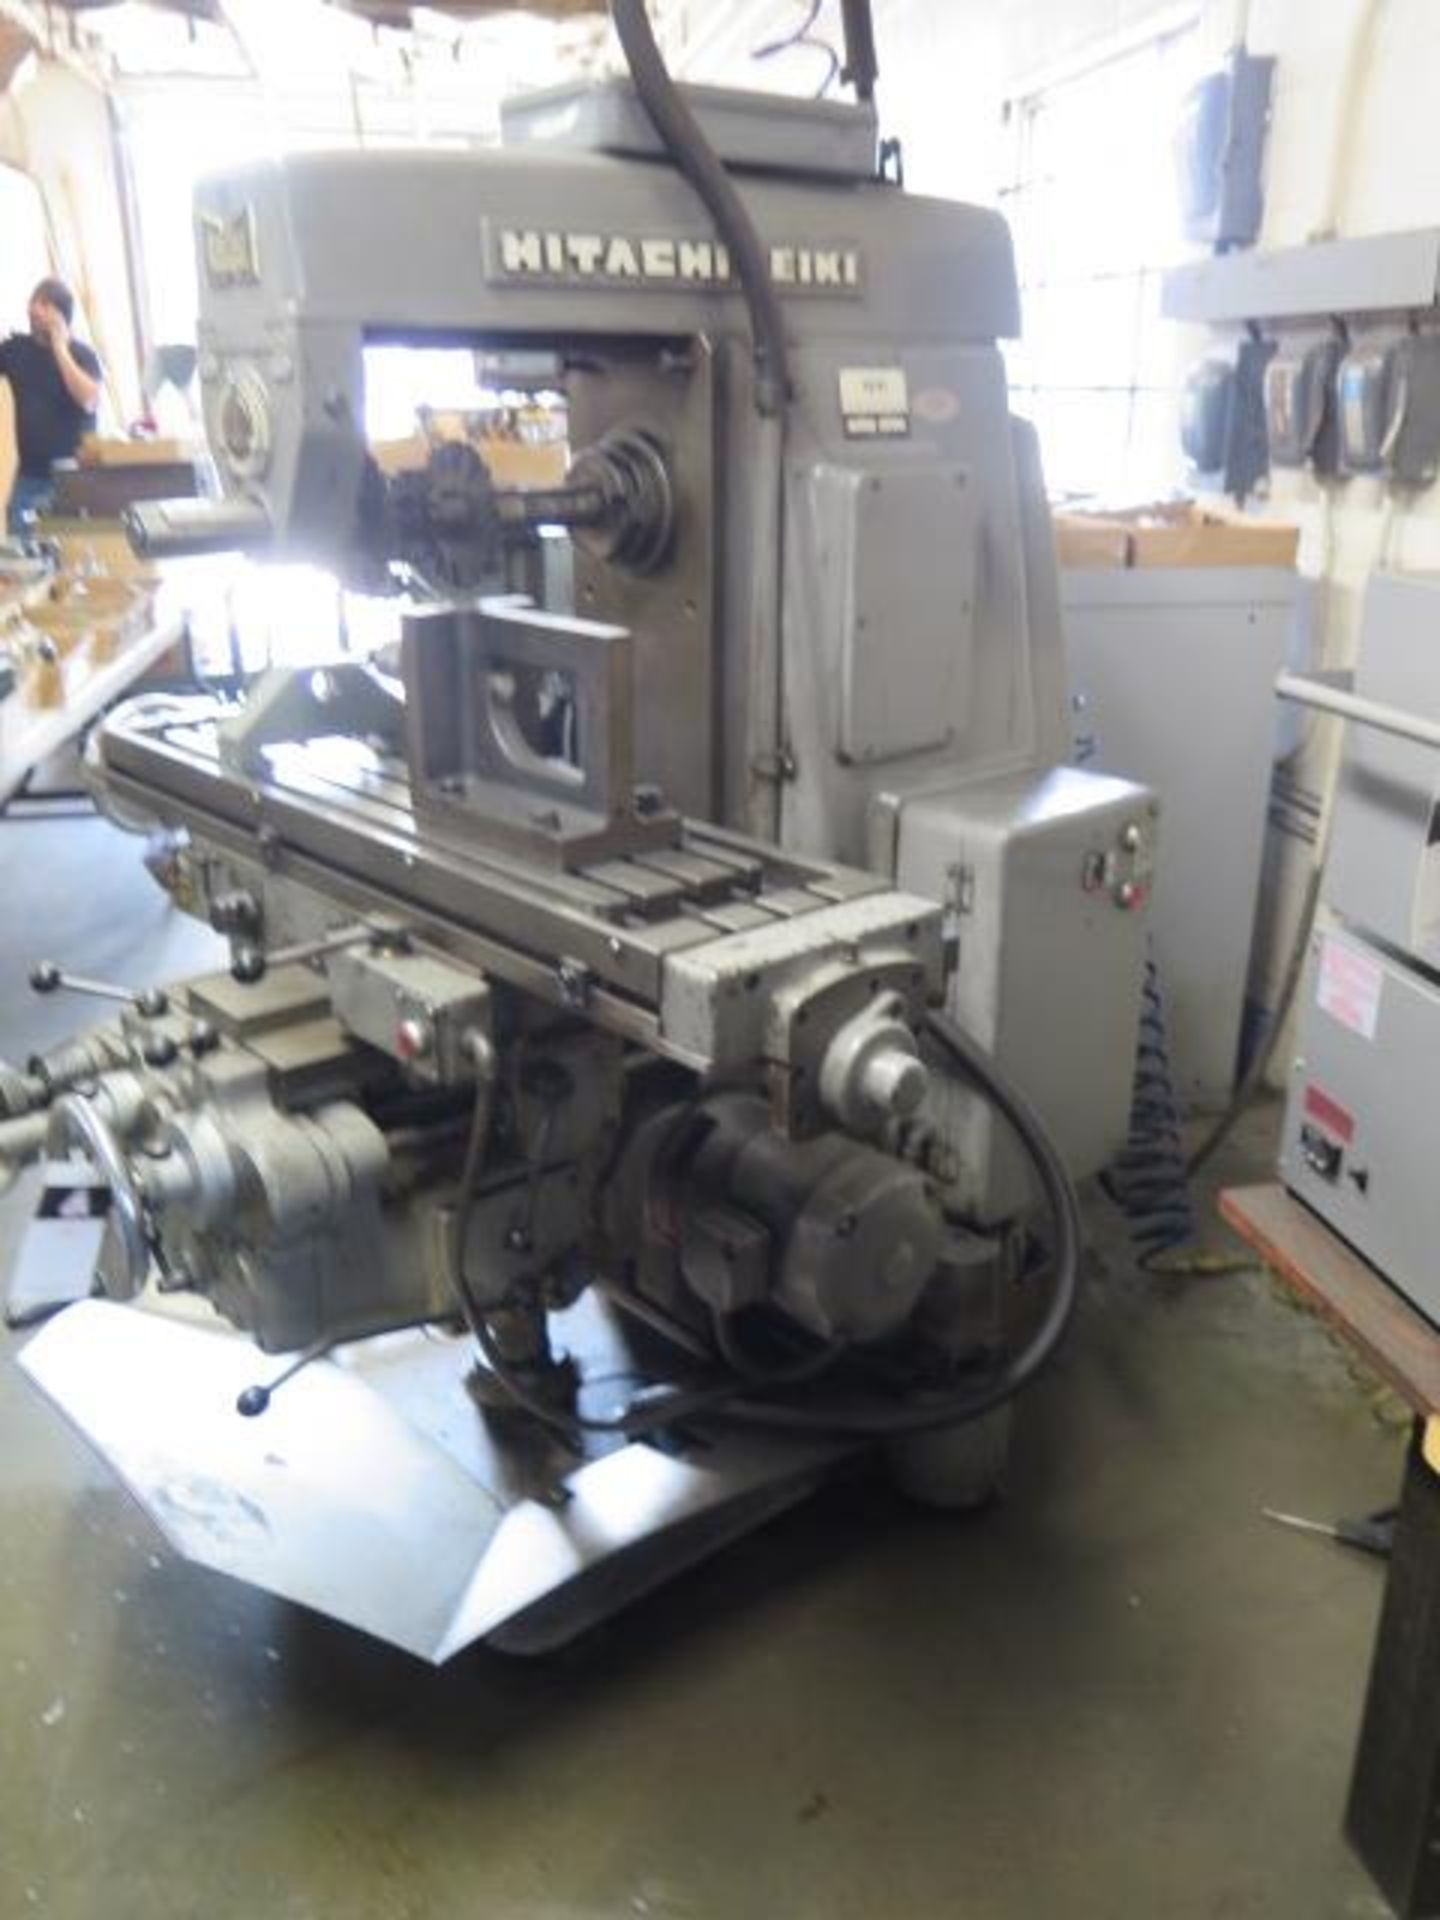 Hitachi Seiki MS-P Horiz Mill s/n N-5075 w/ 60-1800 RPM, 50-Taper Spindle, Power Feeds, SOLD AS IS - Image 3 of 14